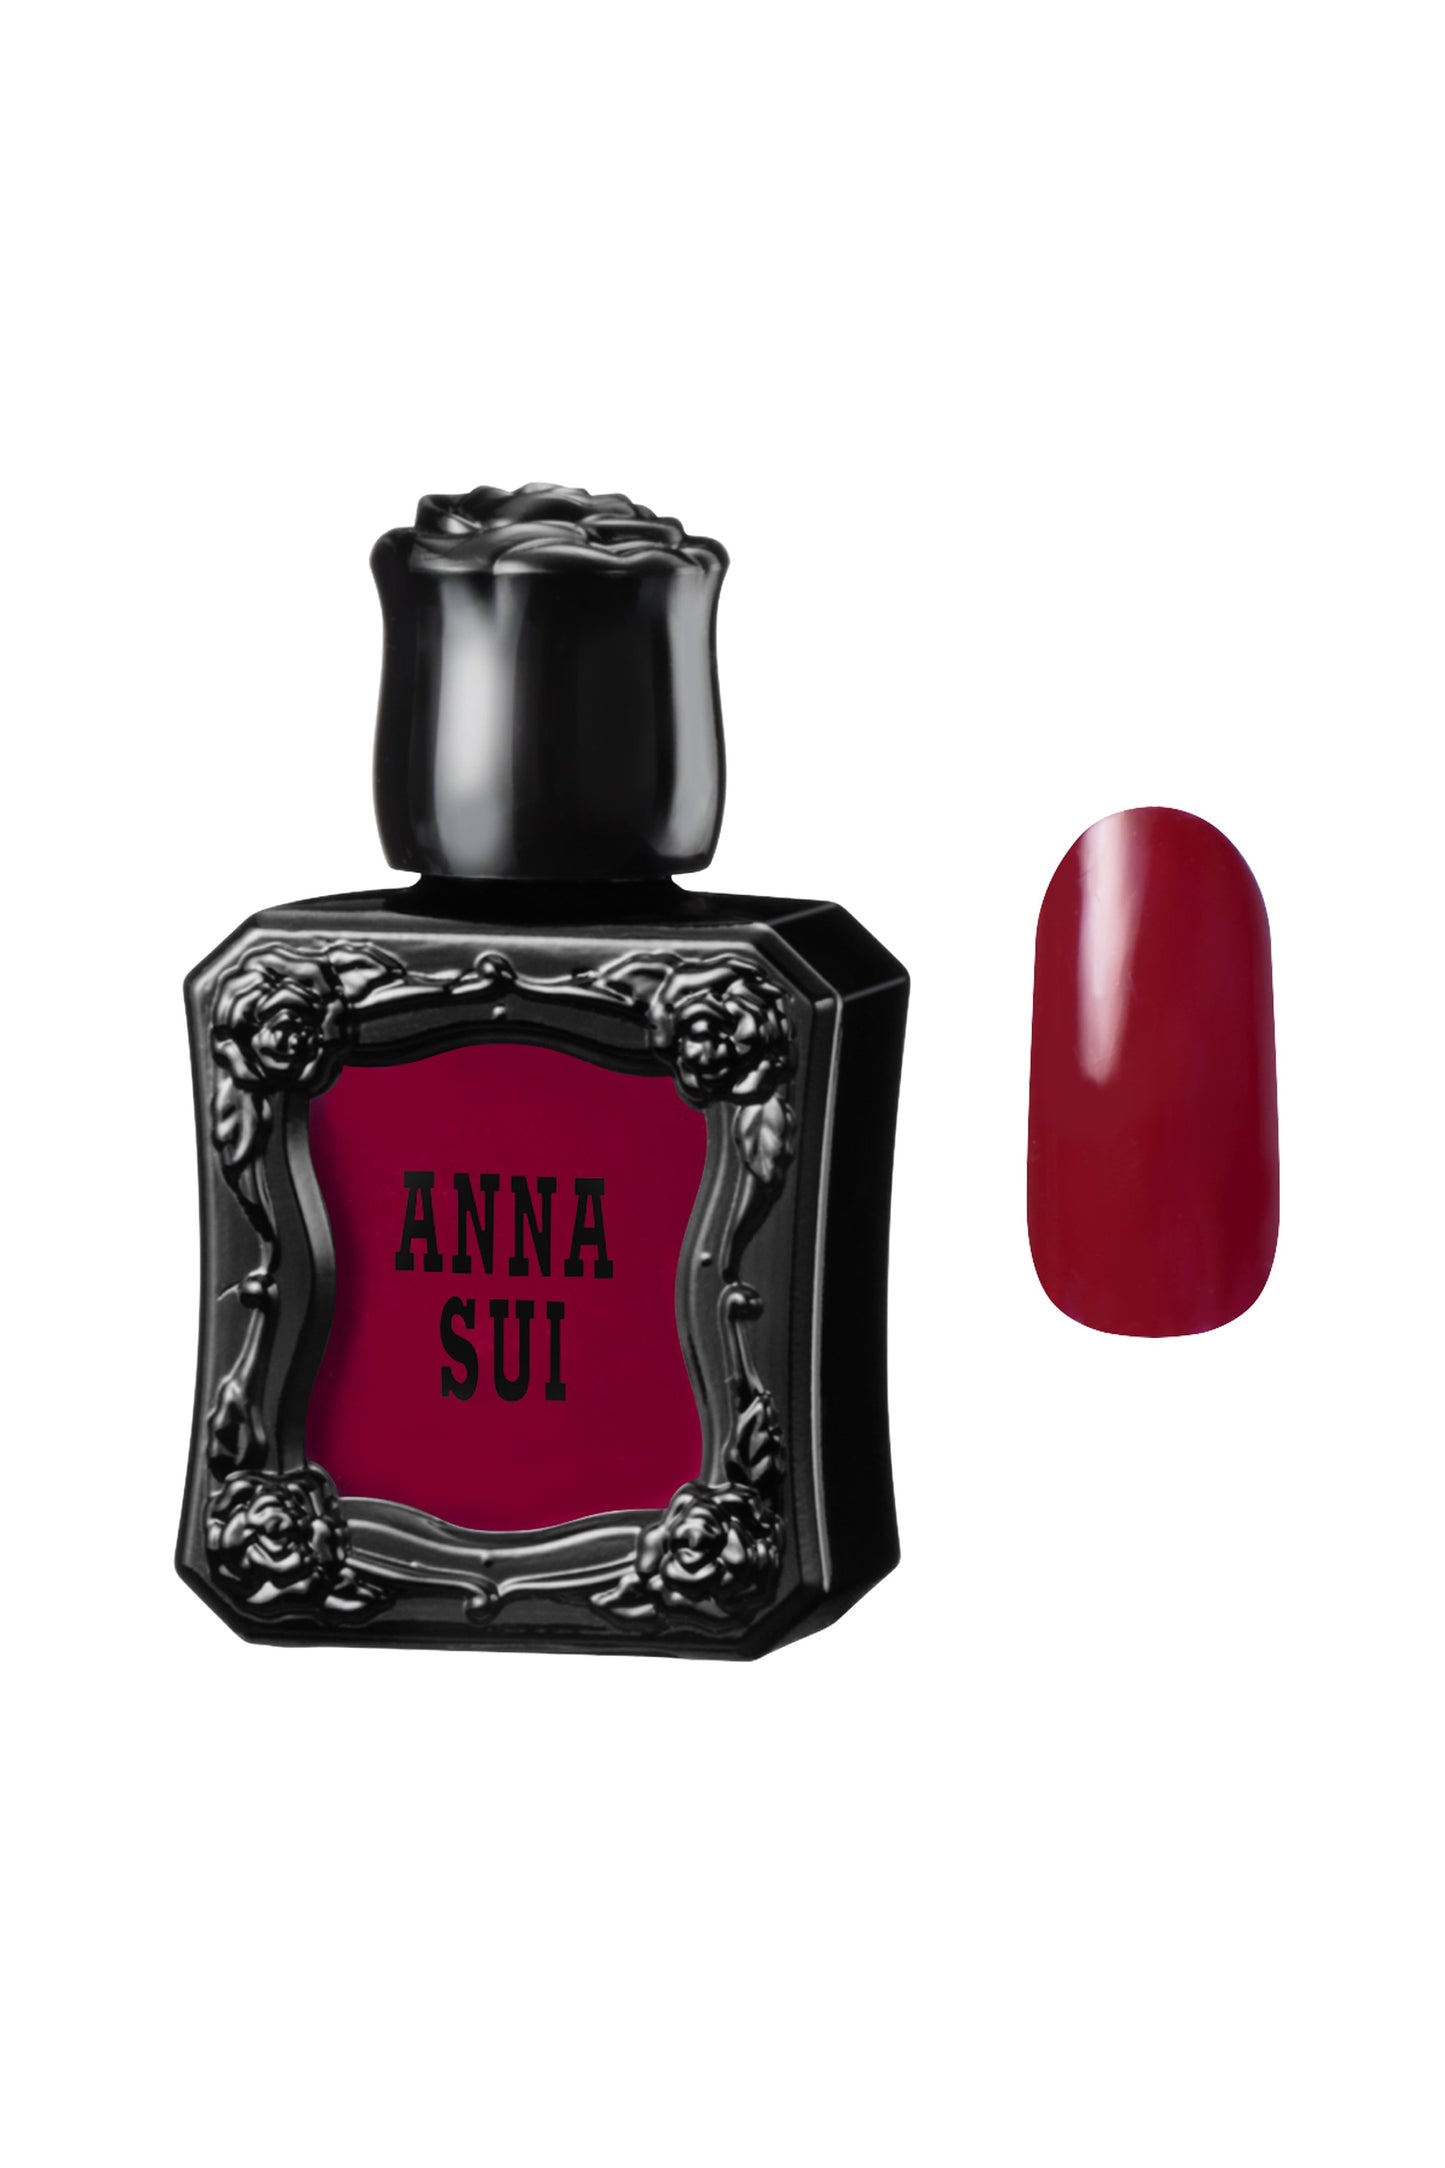 ANNA RED Nail Polish bottle raised rose pattern, Anna Sui in black over nail colors in bottle front